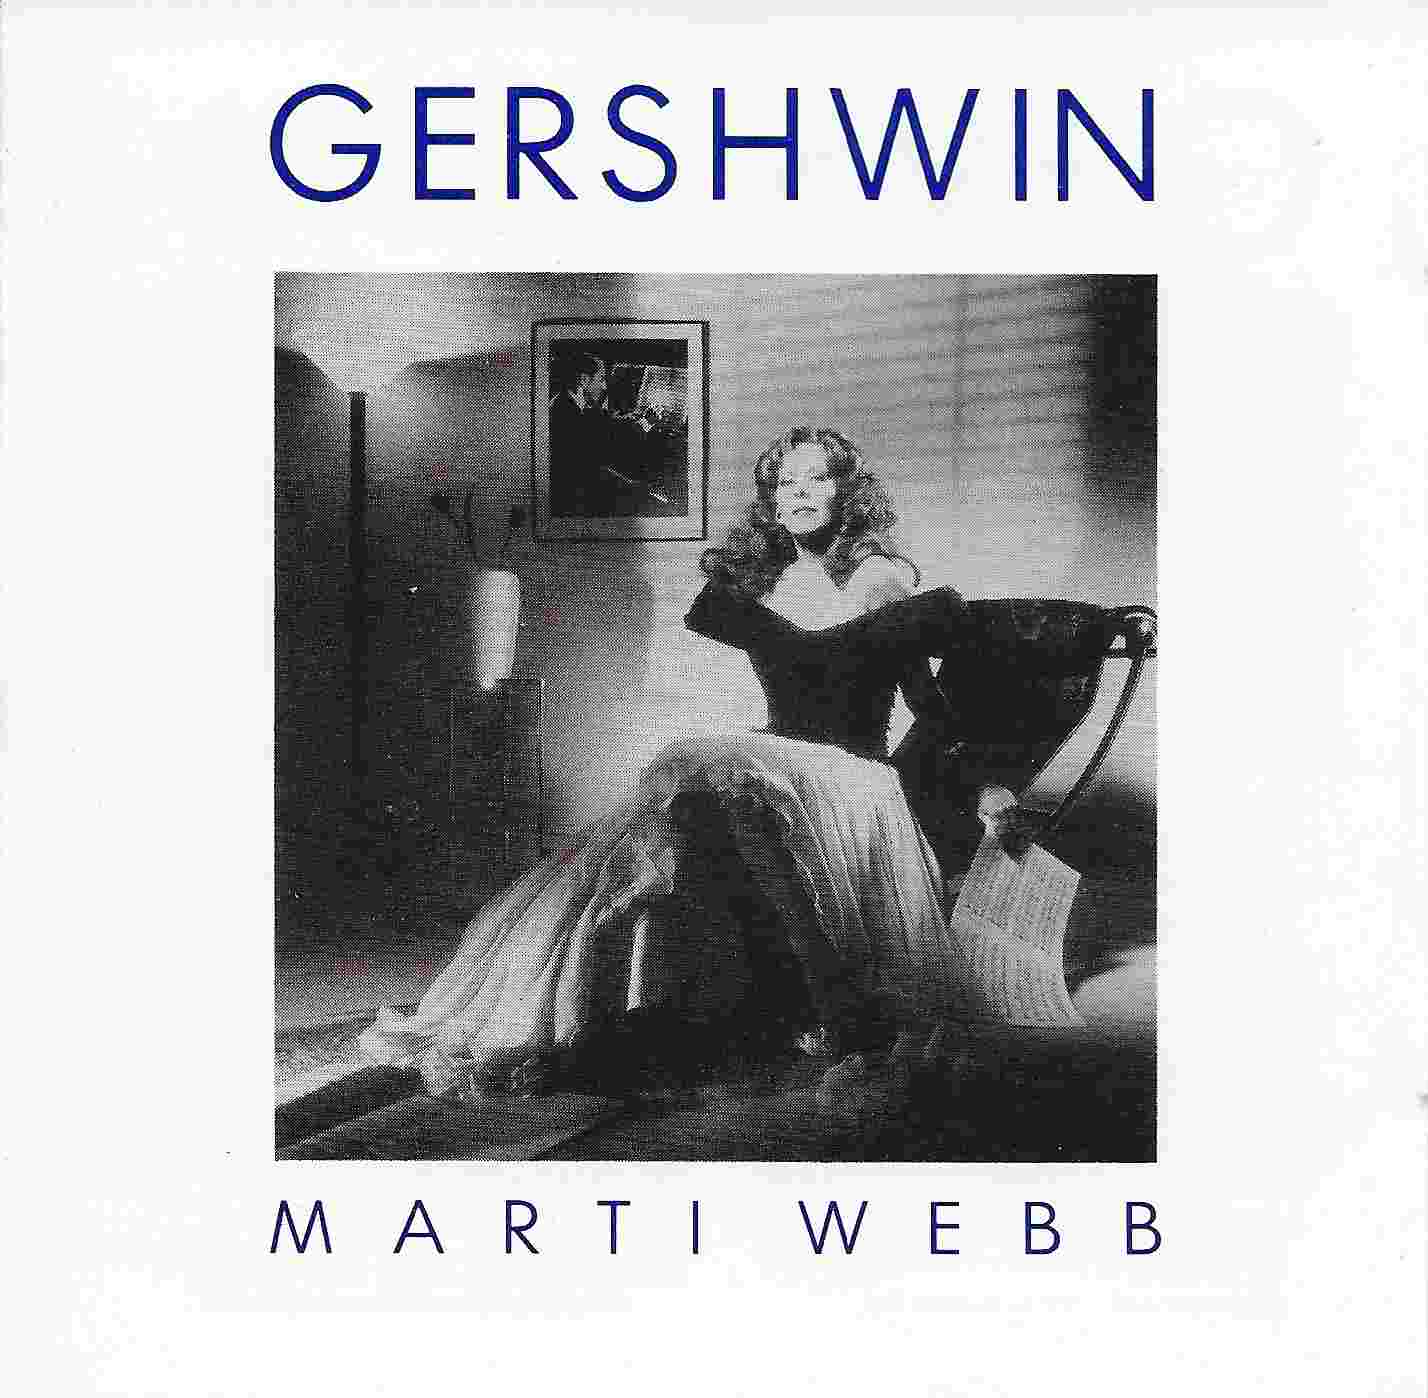 Picture of BBCCD640 Gershwin by artist Marti Webb from the BBC cds - Records and Tapes library